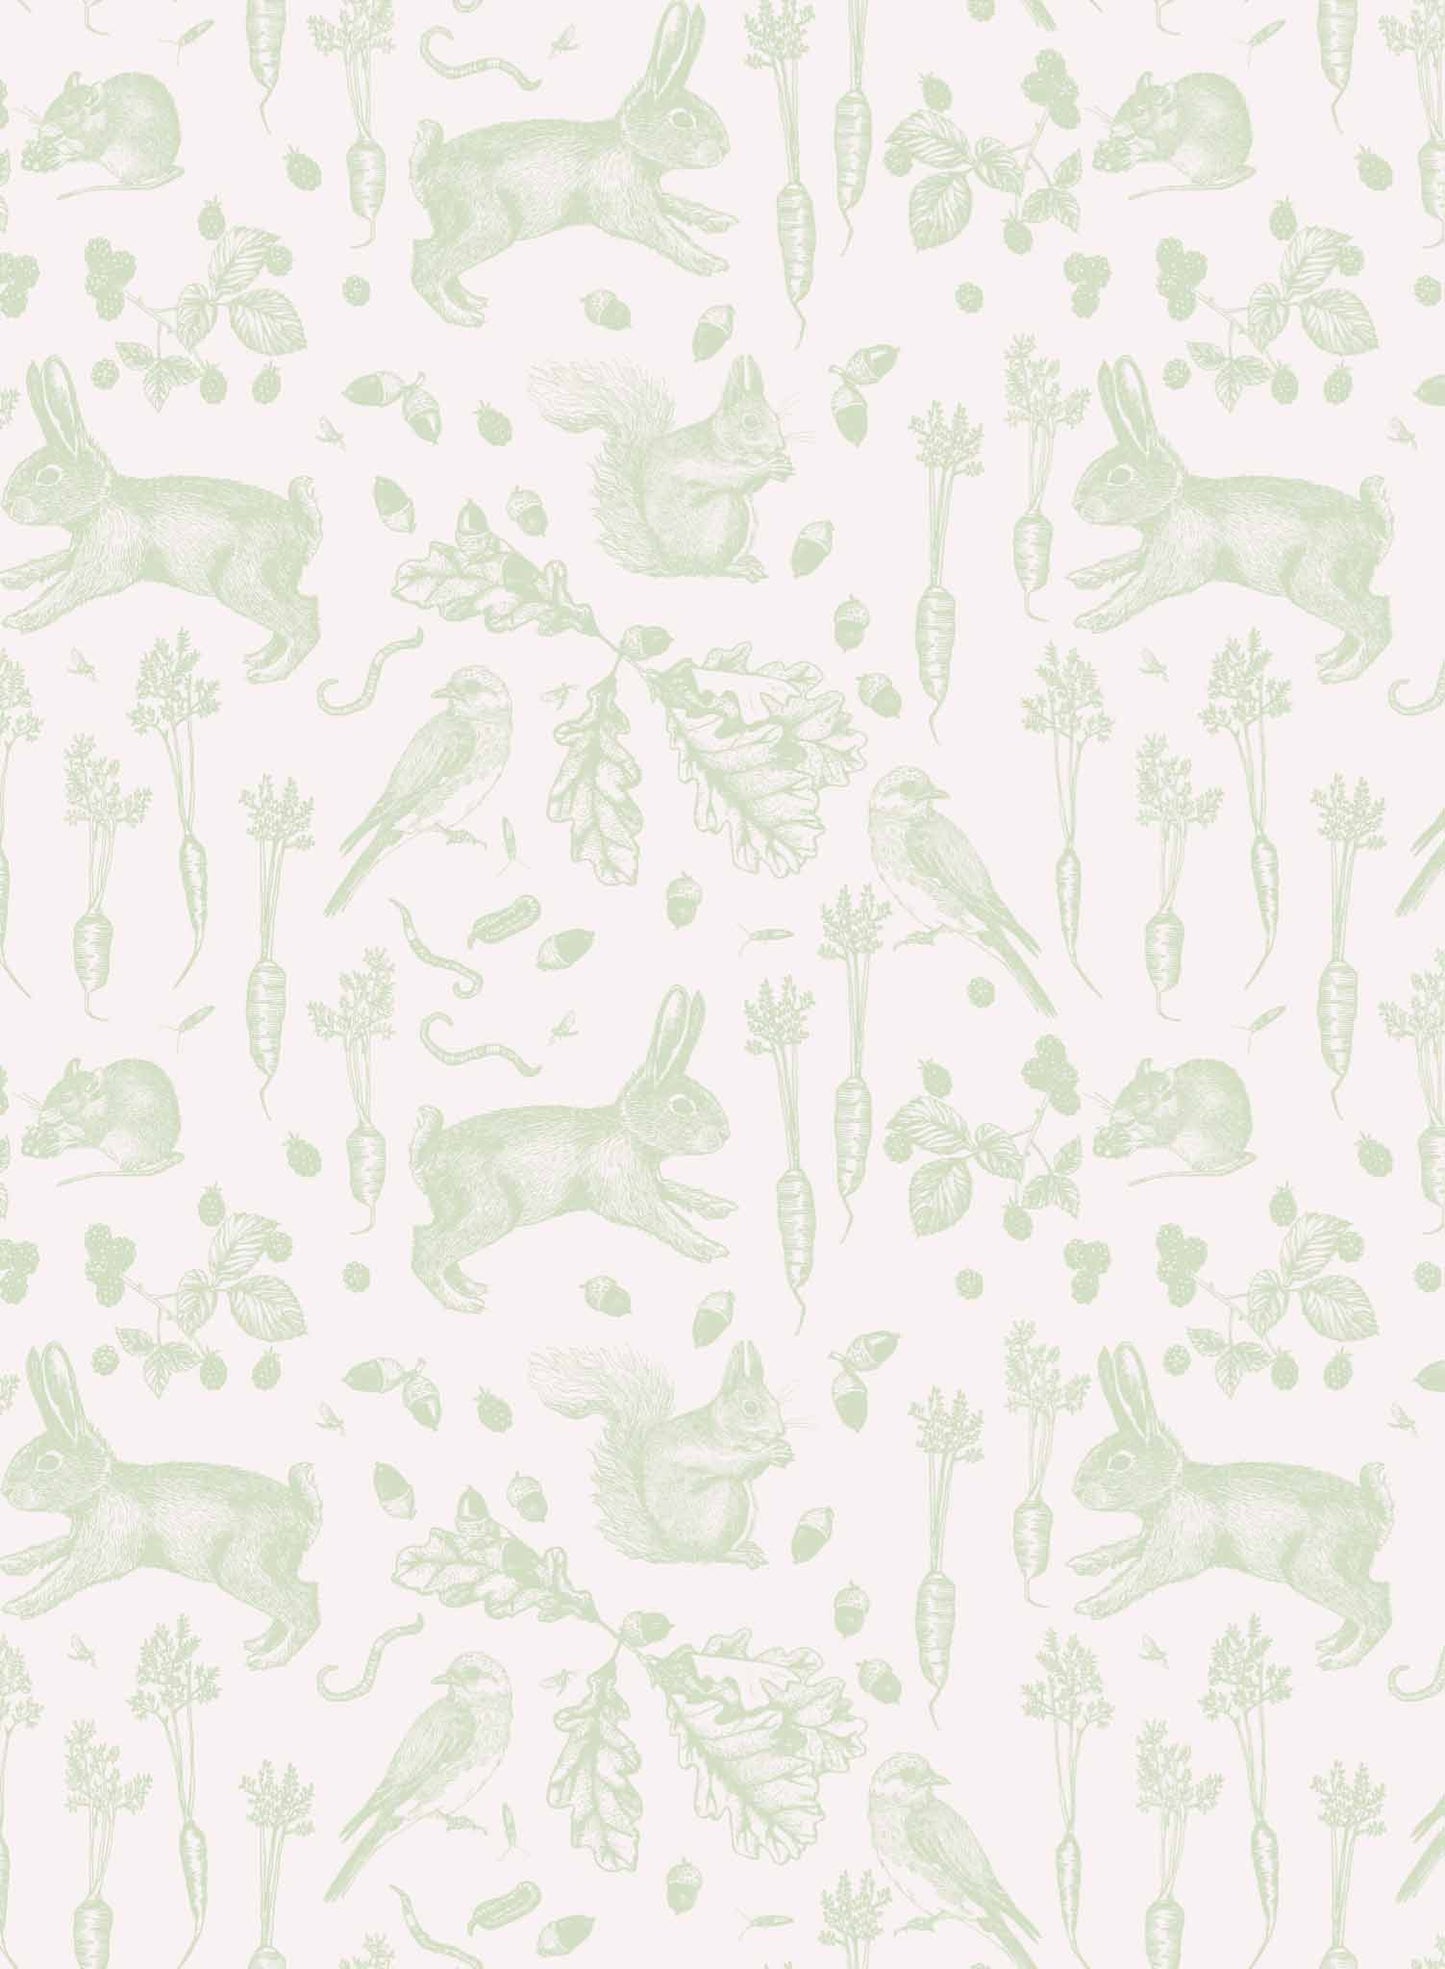 Garden Thieves is a minimalist wallpaper by Opposite Wall of common animals and vegetables found in a backyard garden.